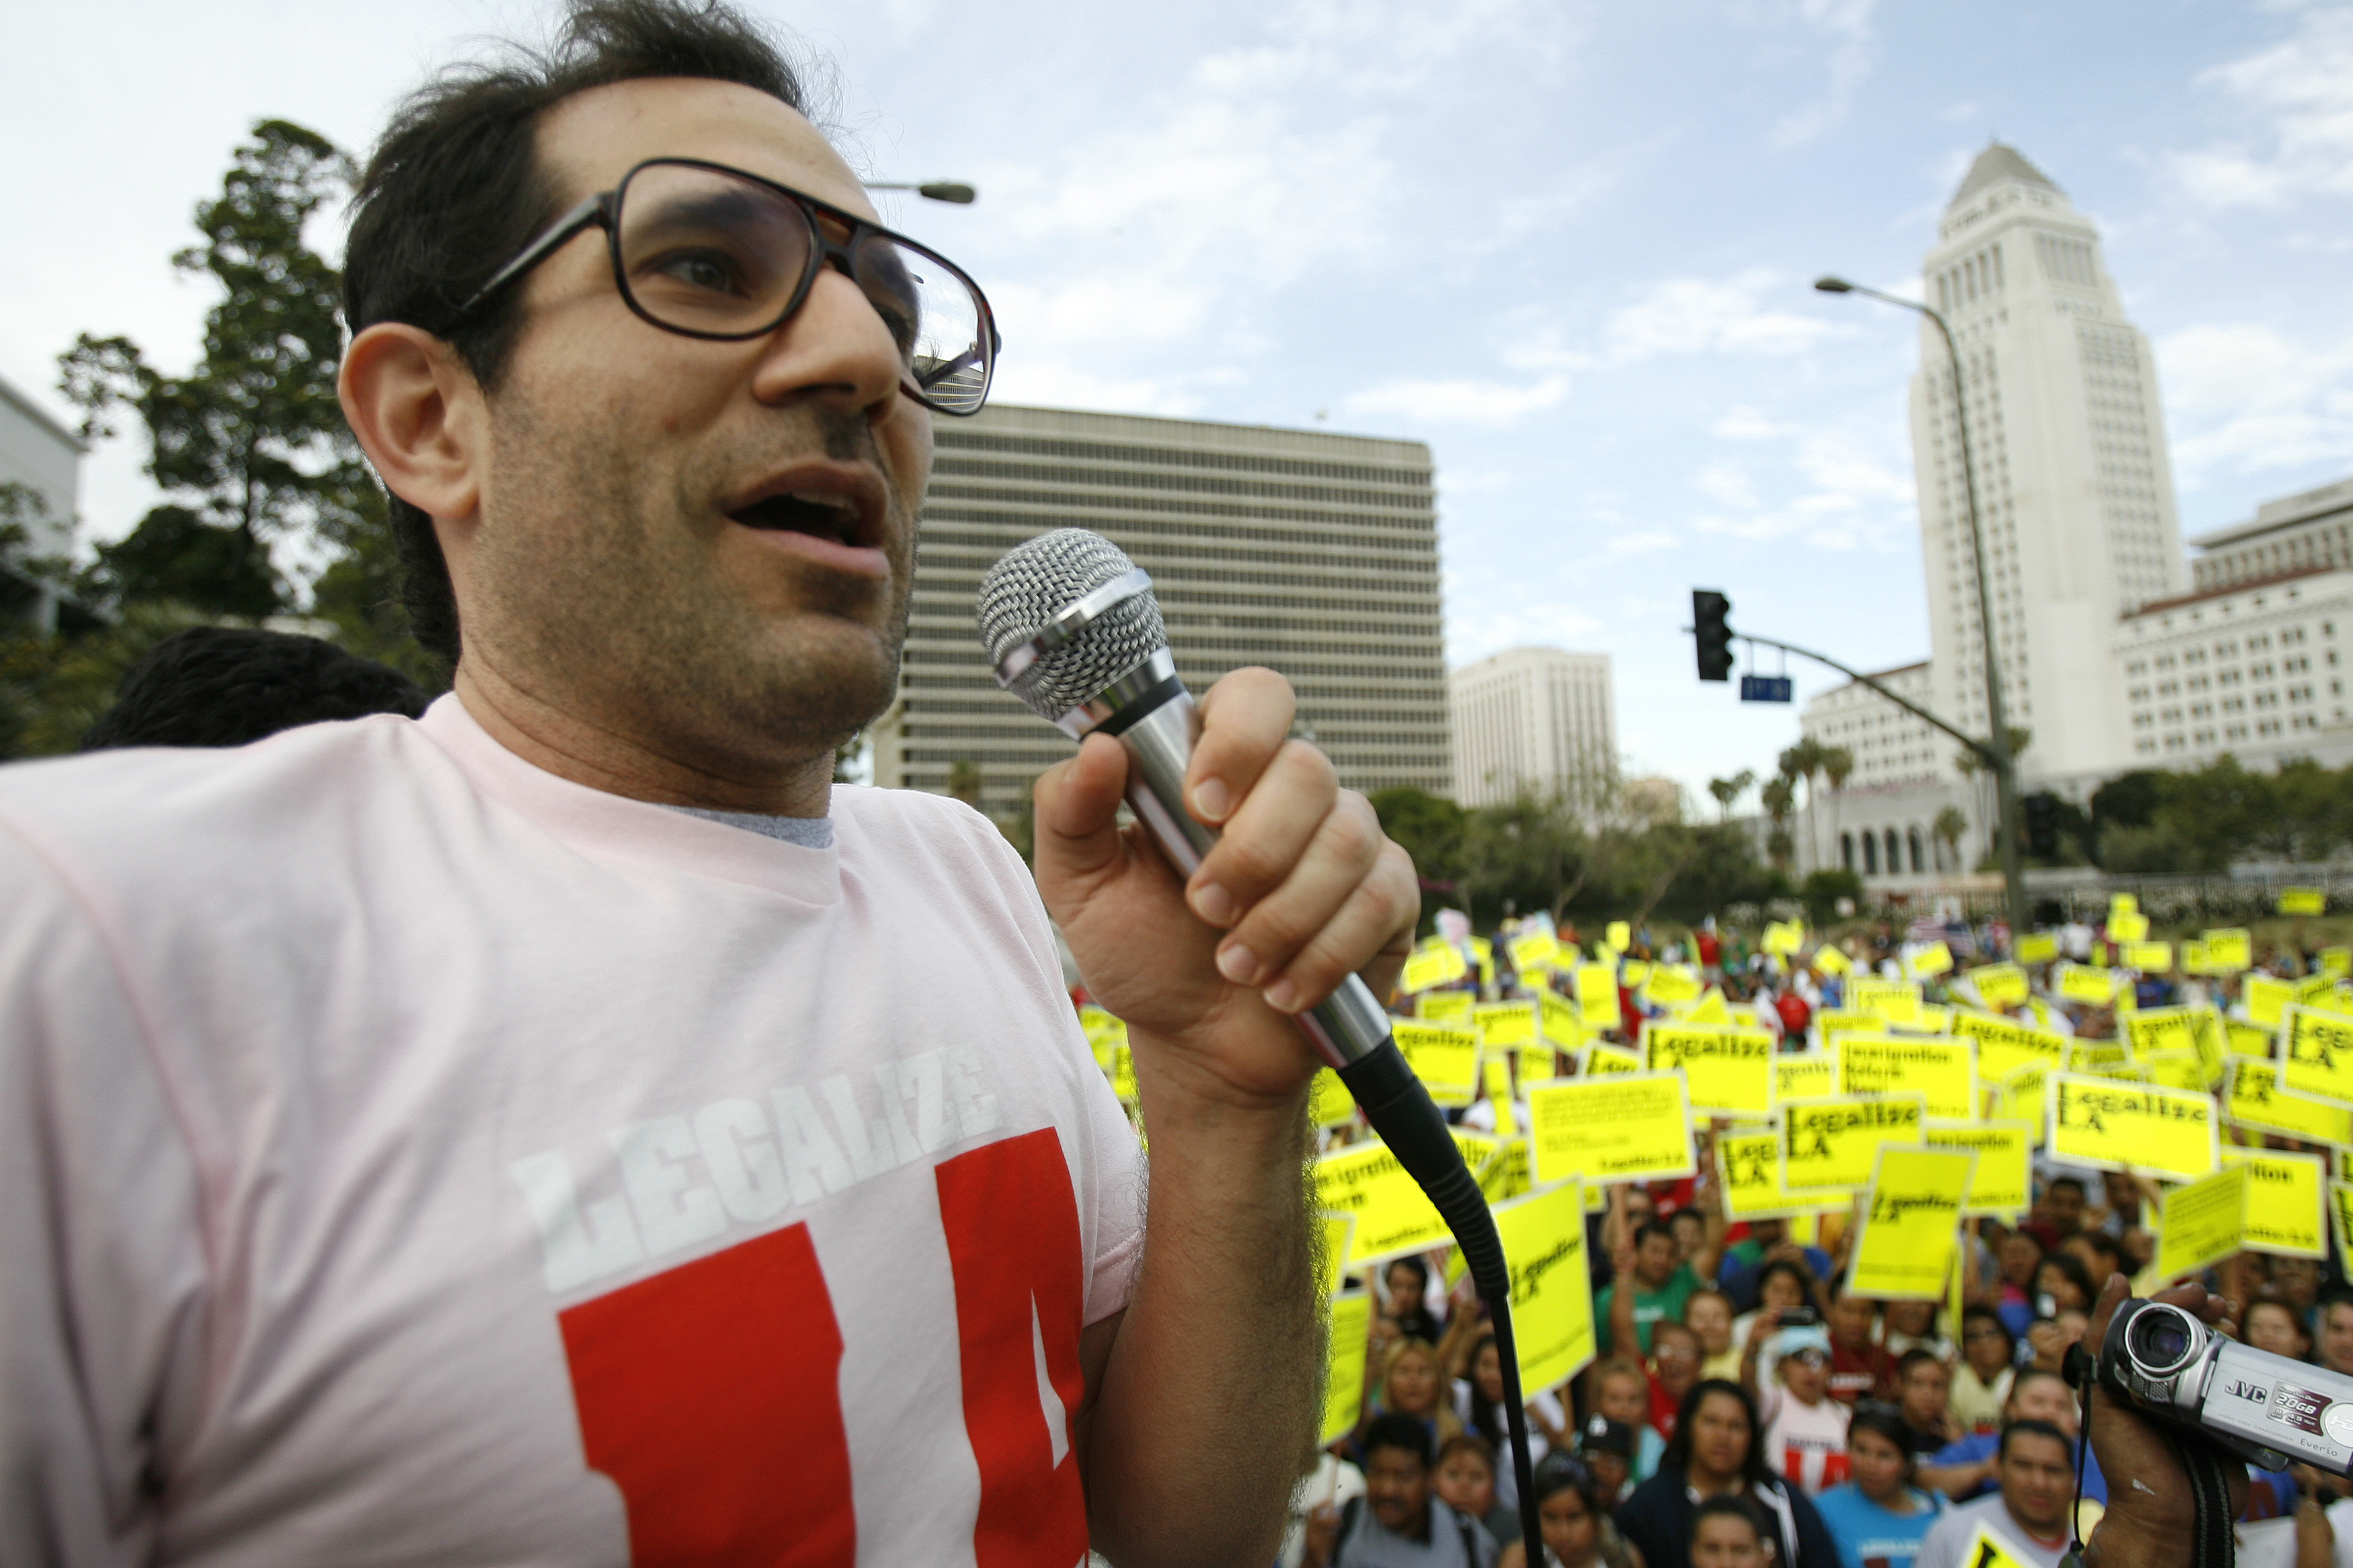 American Apparel owner Dov Charney speaks during a May Day rally march for immigrant rights in downtown Los Angeles on May 1, 2009 (Mario Anzuoni—Reuters)